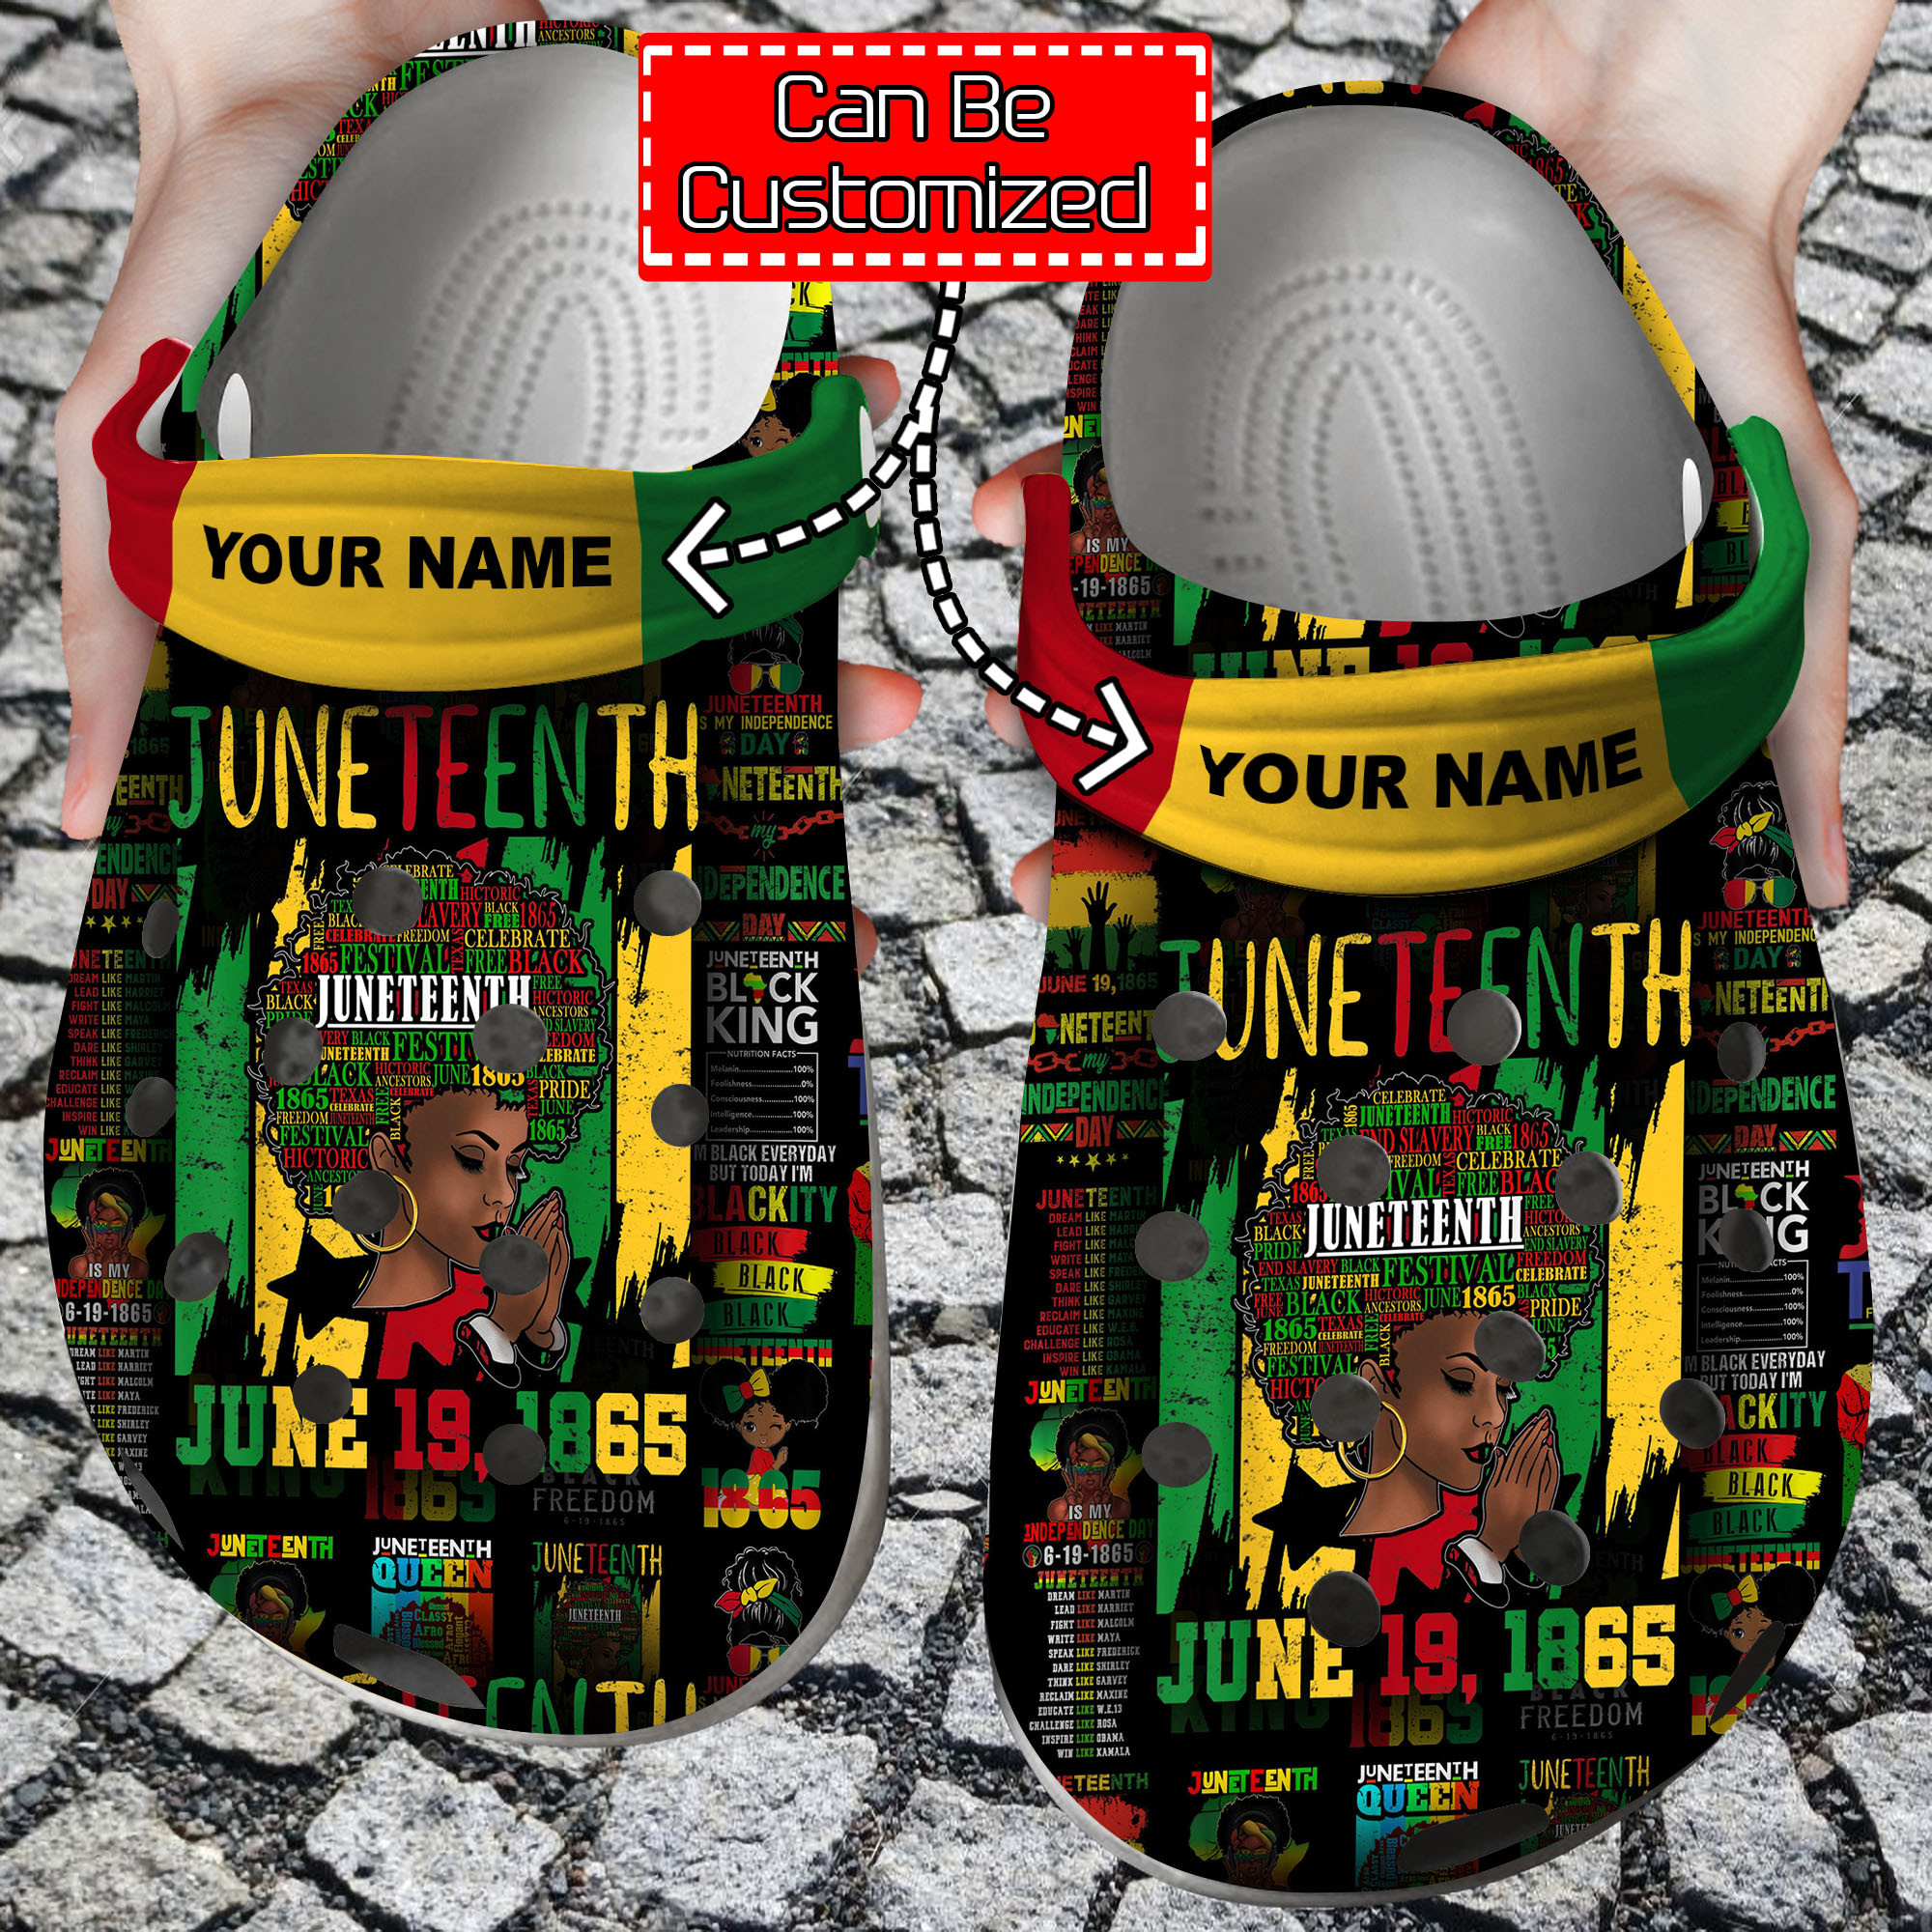 Custom Crocs – Personalized Juneteenth Black Americans Independence 1865 Clog Shoes